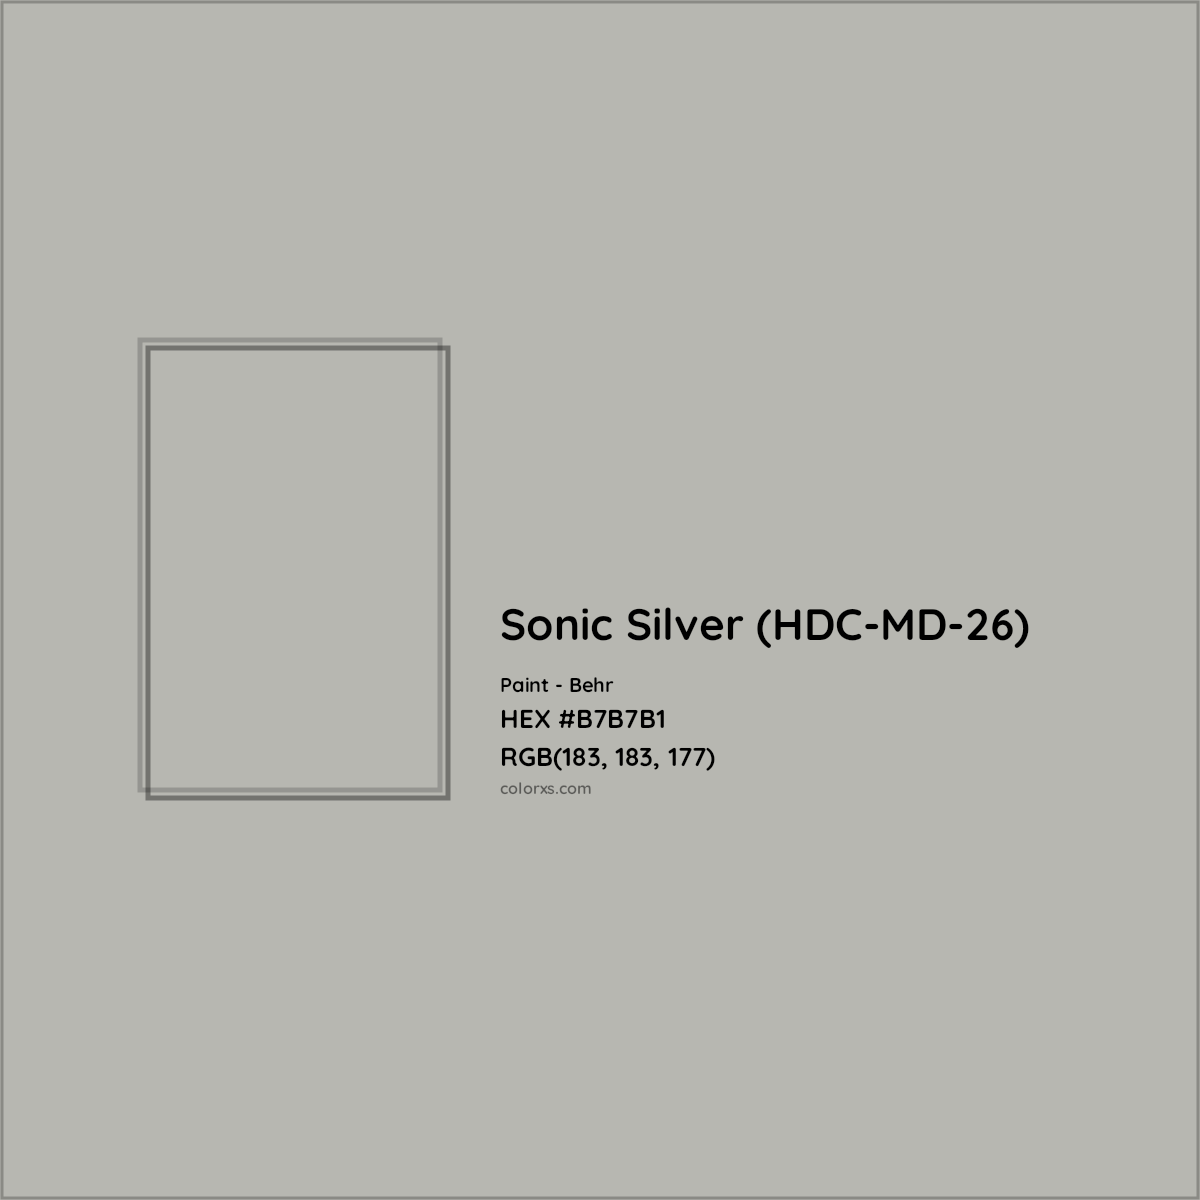 HEX #B7B7B1 Sonic Silver (HDC-MD-26) Paint Behr - Color Code